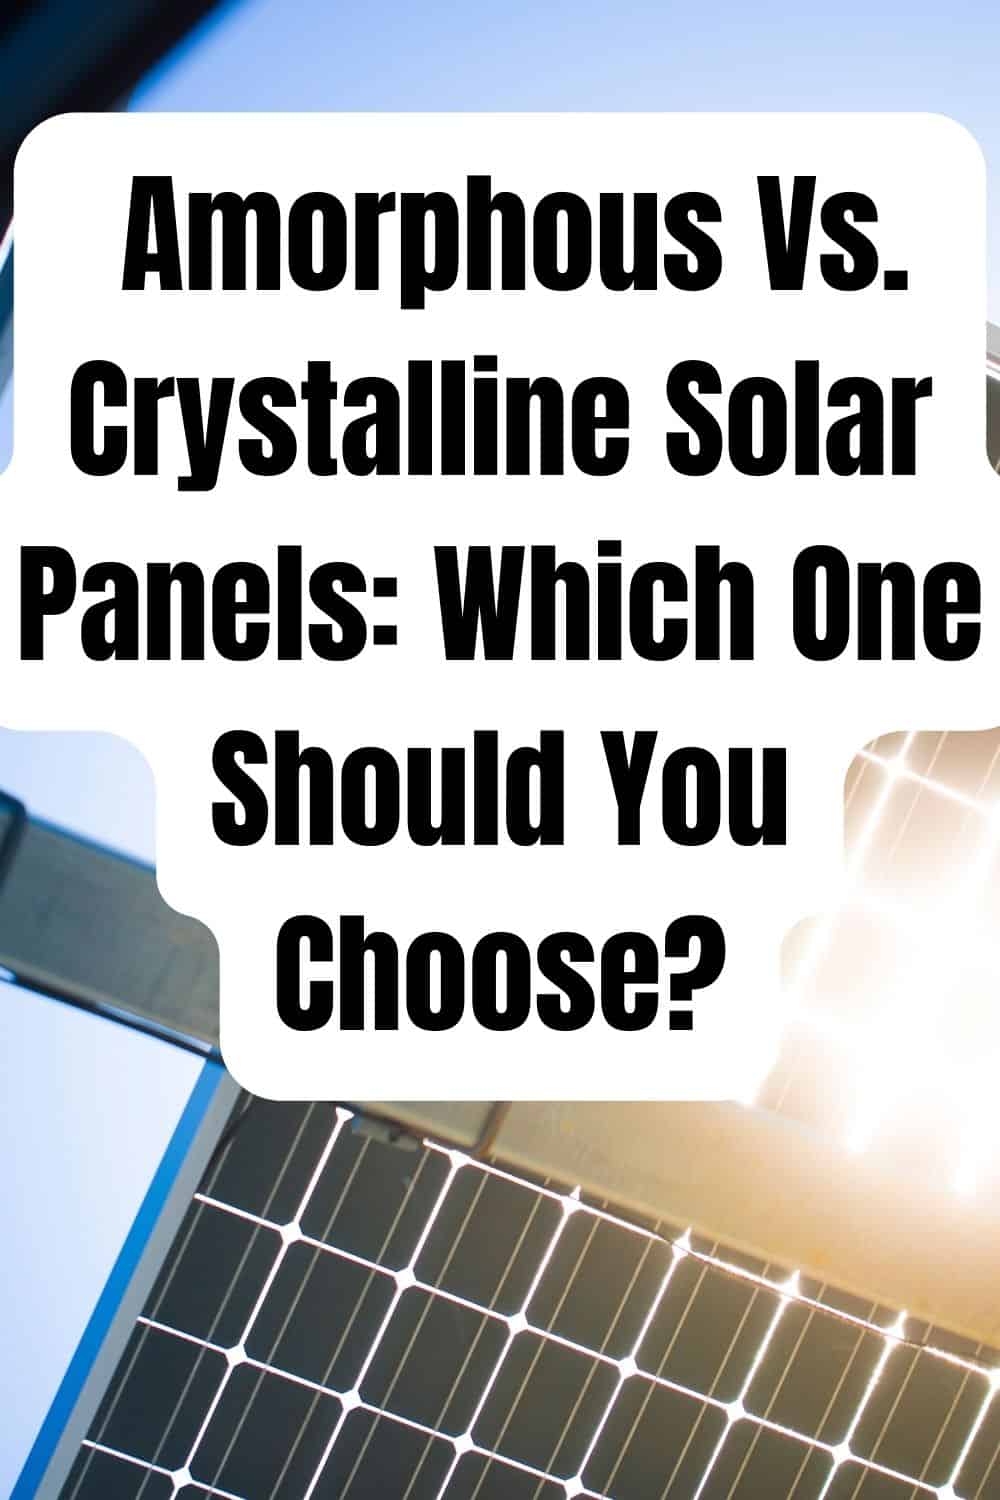 Pinterest image for Amorphous Vs. Crystalline Solar Panels - Which One Should You Choose?